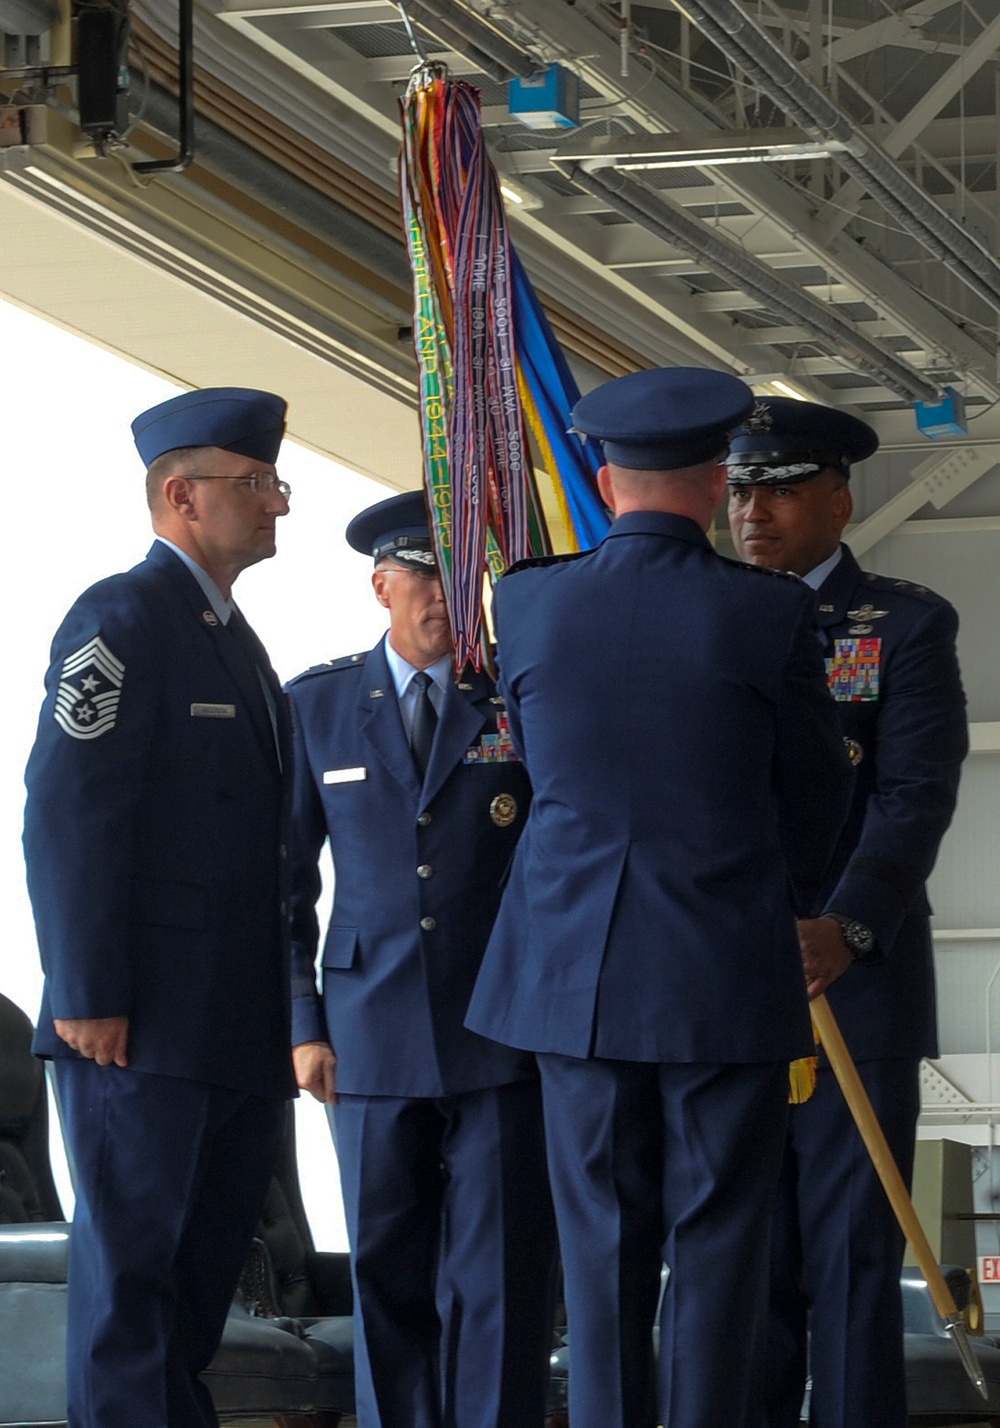 8th Air Force change of command